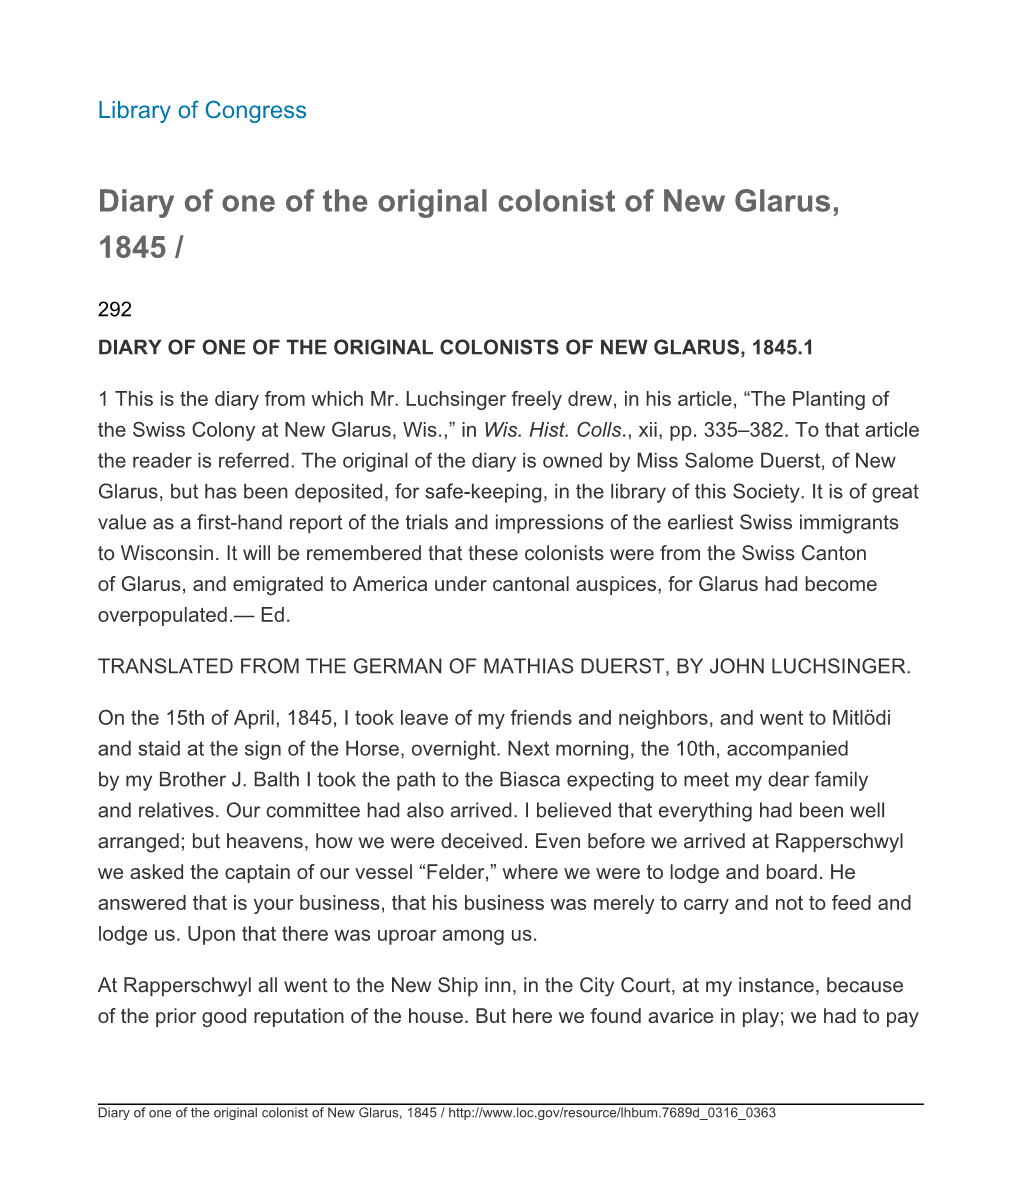 Diary of One of the Original Colonist of New Glarus, 1845